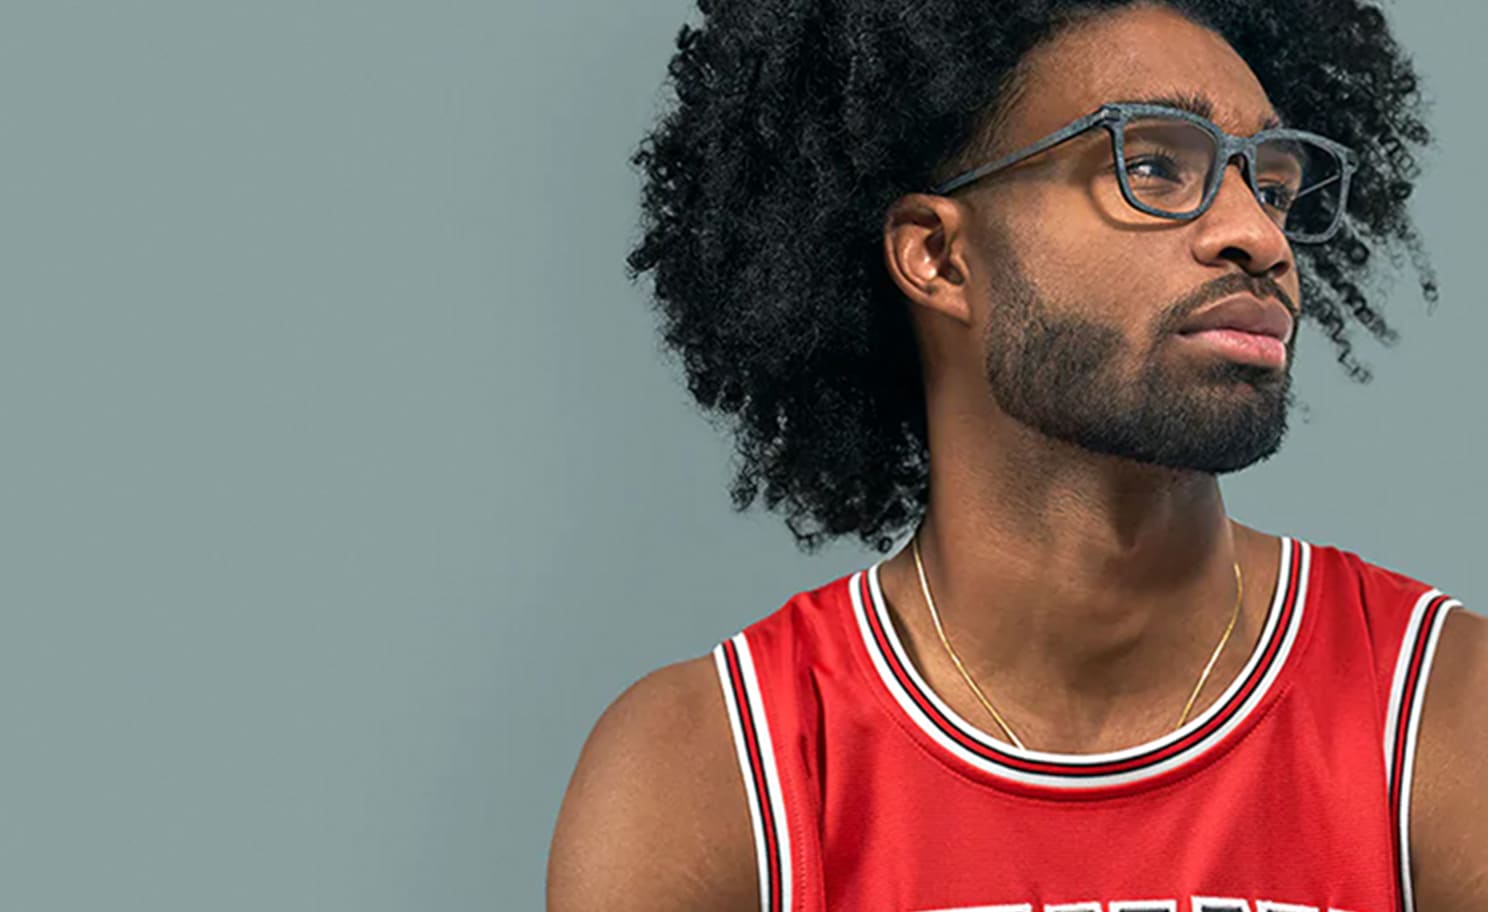 Coby White in a red Zenni basketball jersey, wearing Zenni square glasses #2026616, against a gray background.